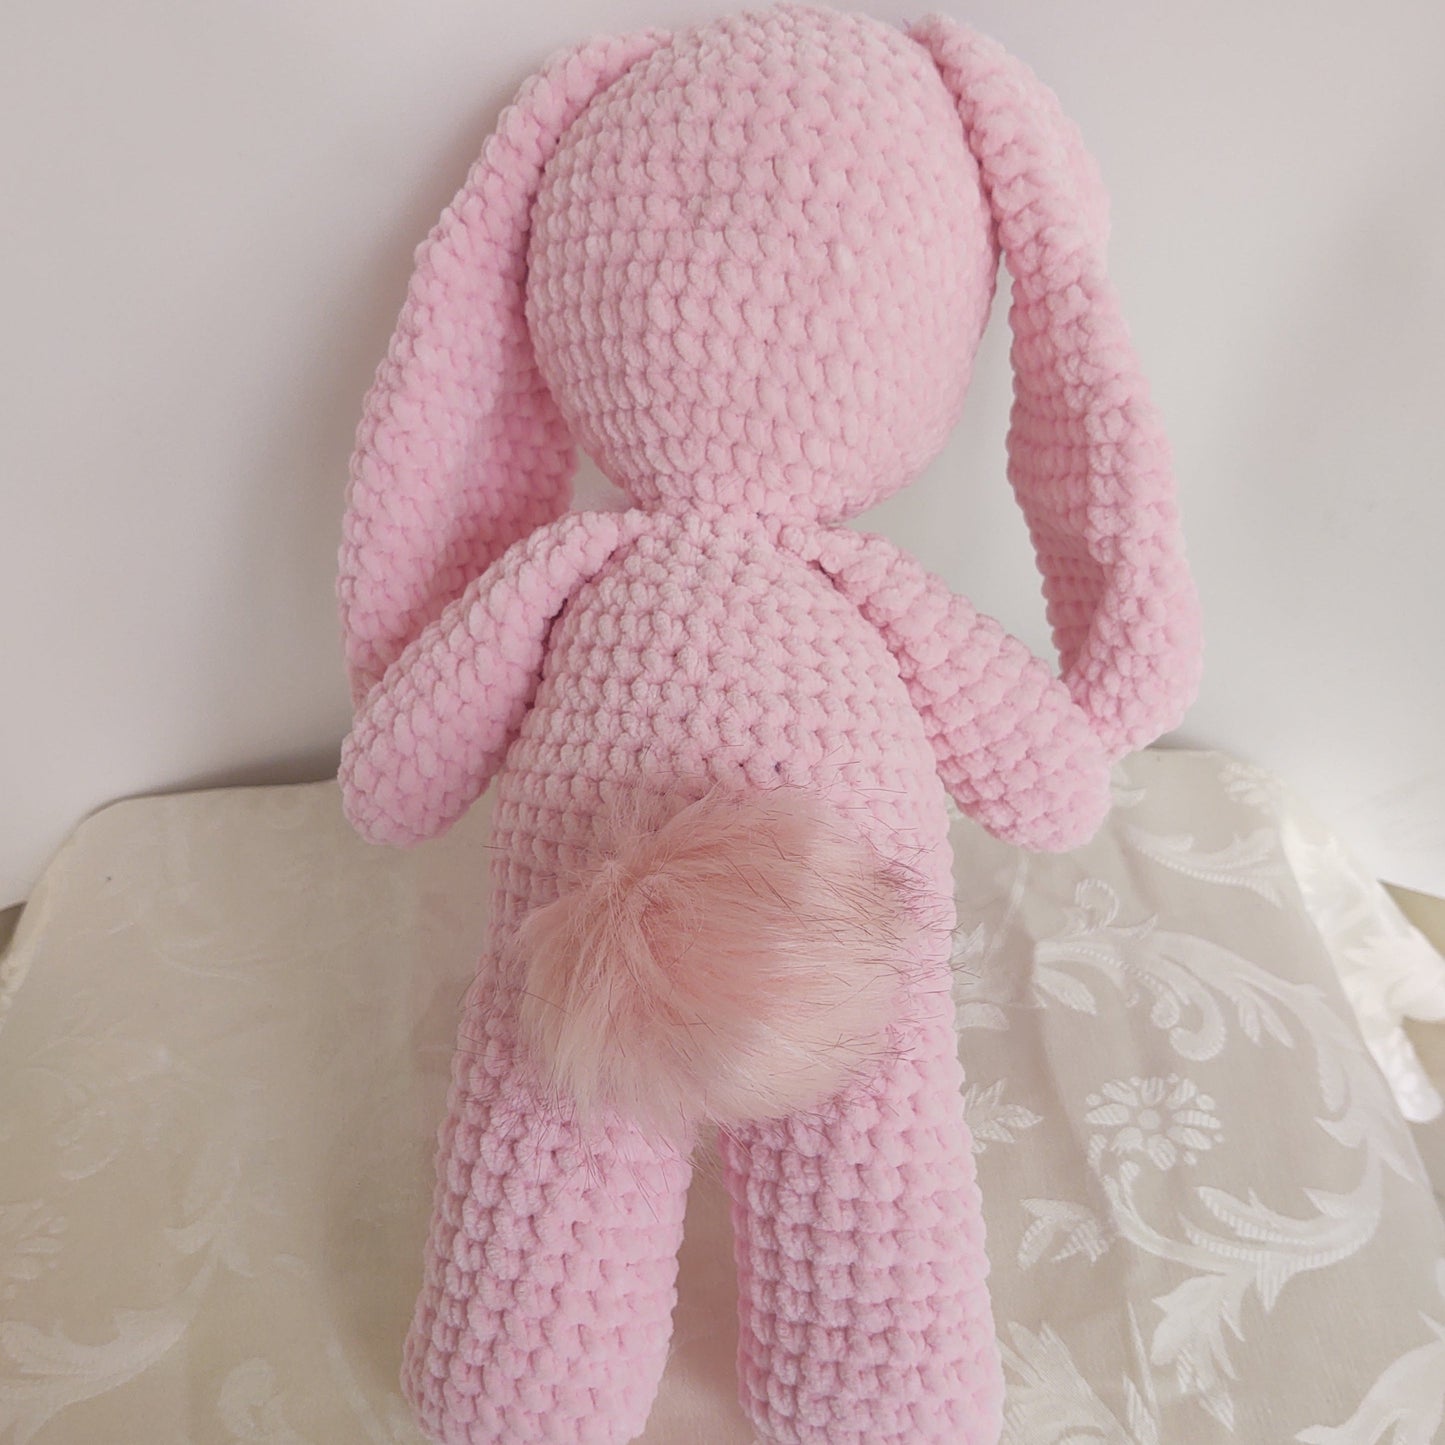 Back of Plush bunny showing faux fur tail